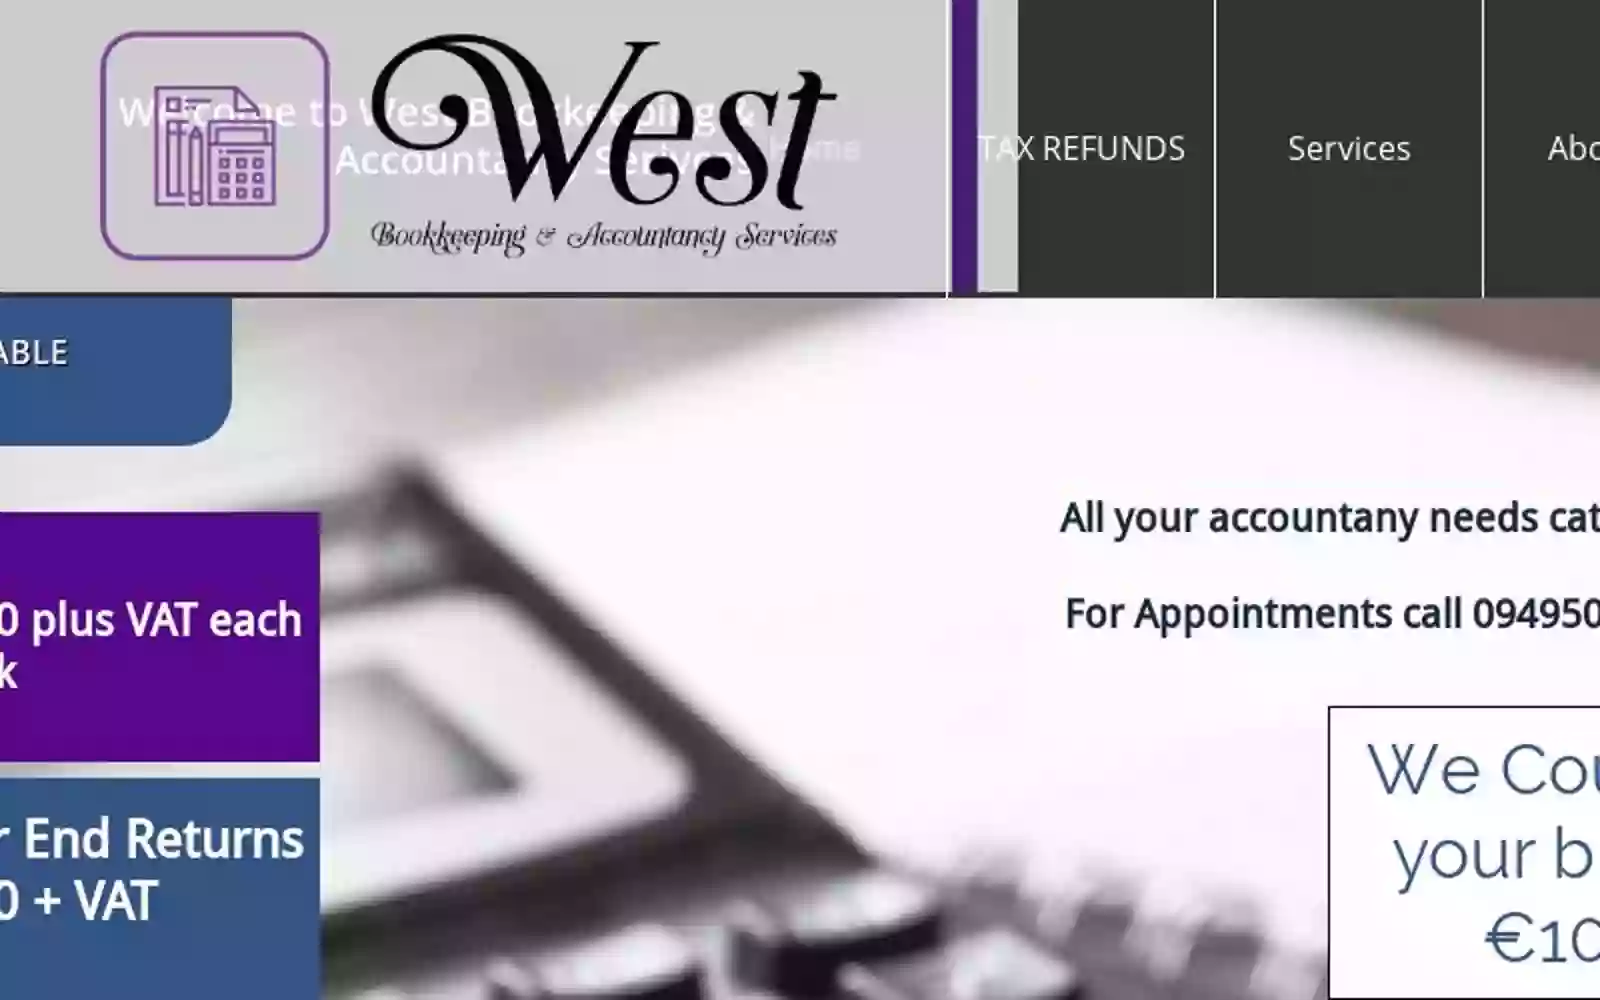 West Bookeeking & Accountancy Services